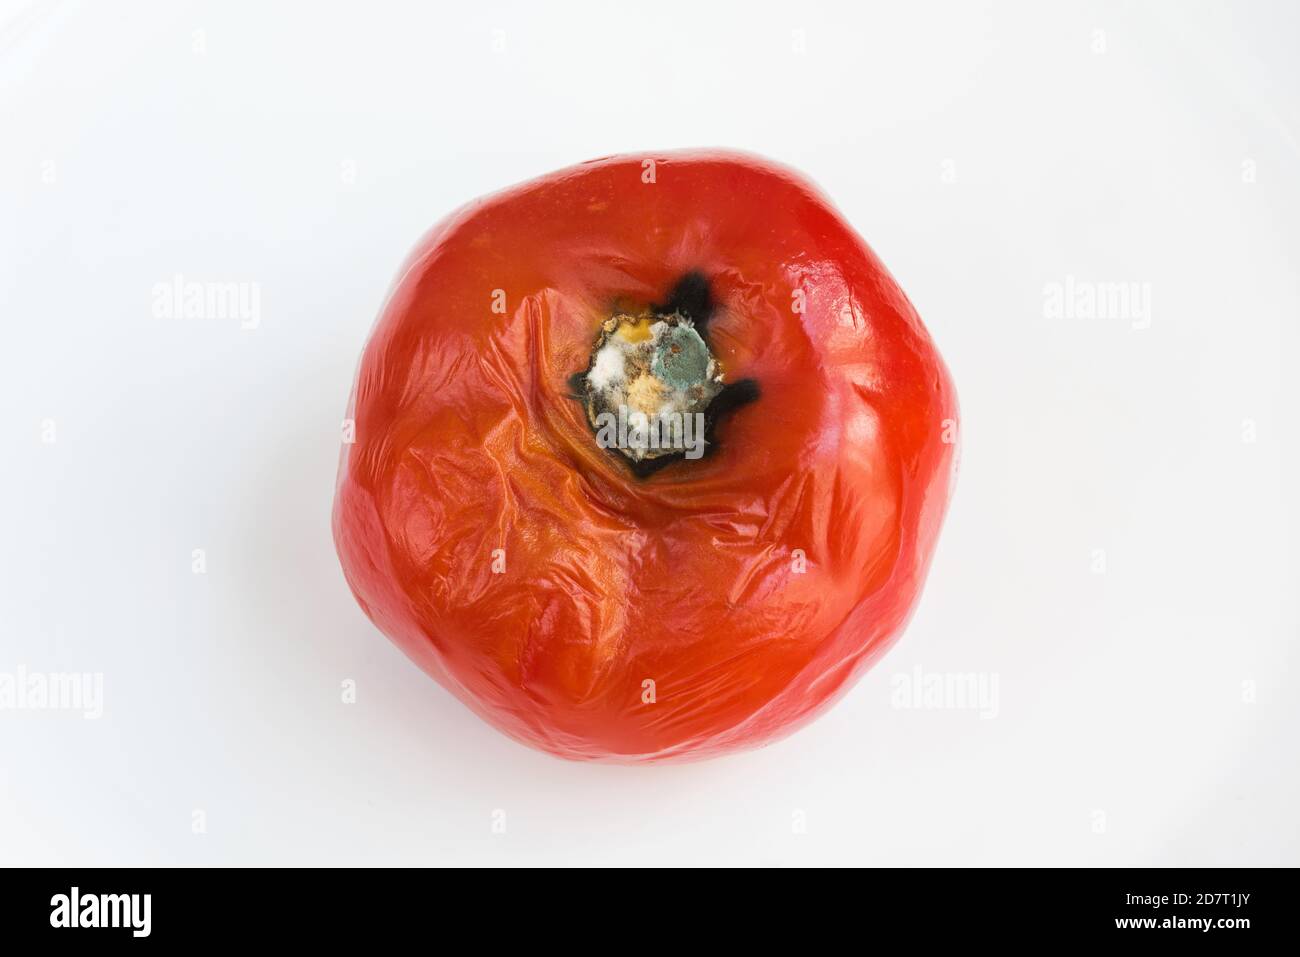 Rotten tomato spoiled by fungi and mold on white background. Inappropriate storage of vegetables. Stock Photo